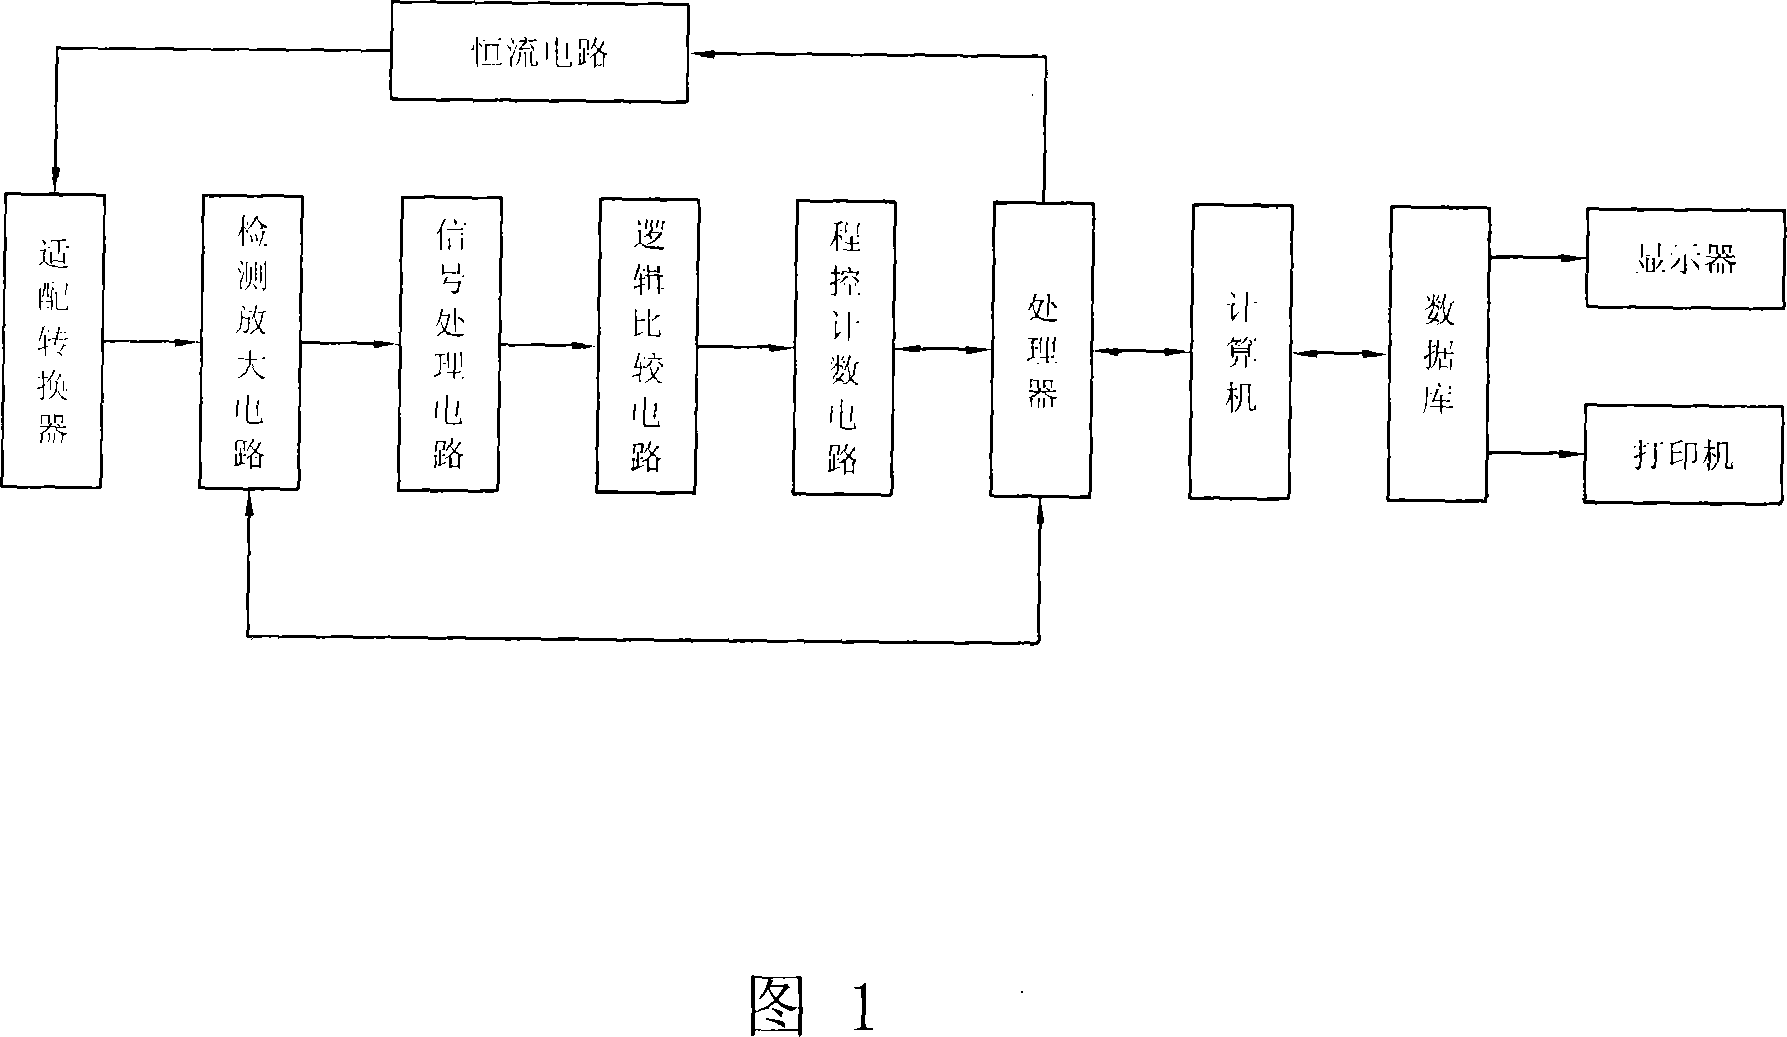 Intermittent disconnection testing system for electric contact piece